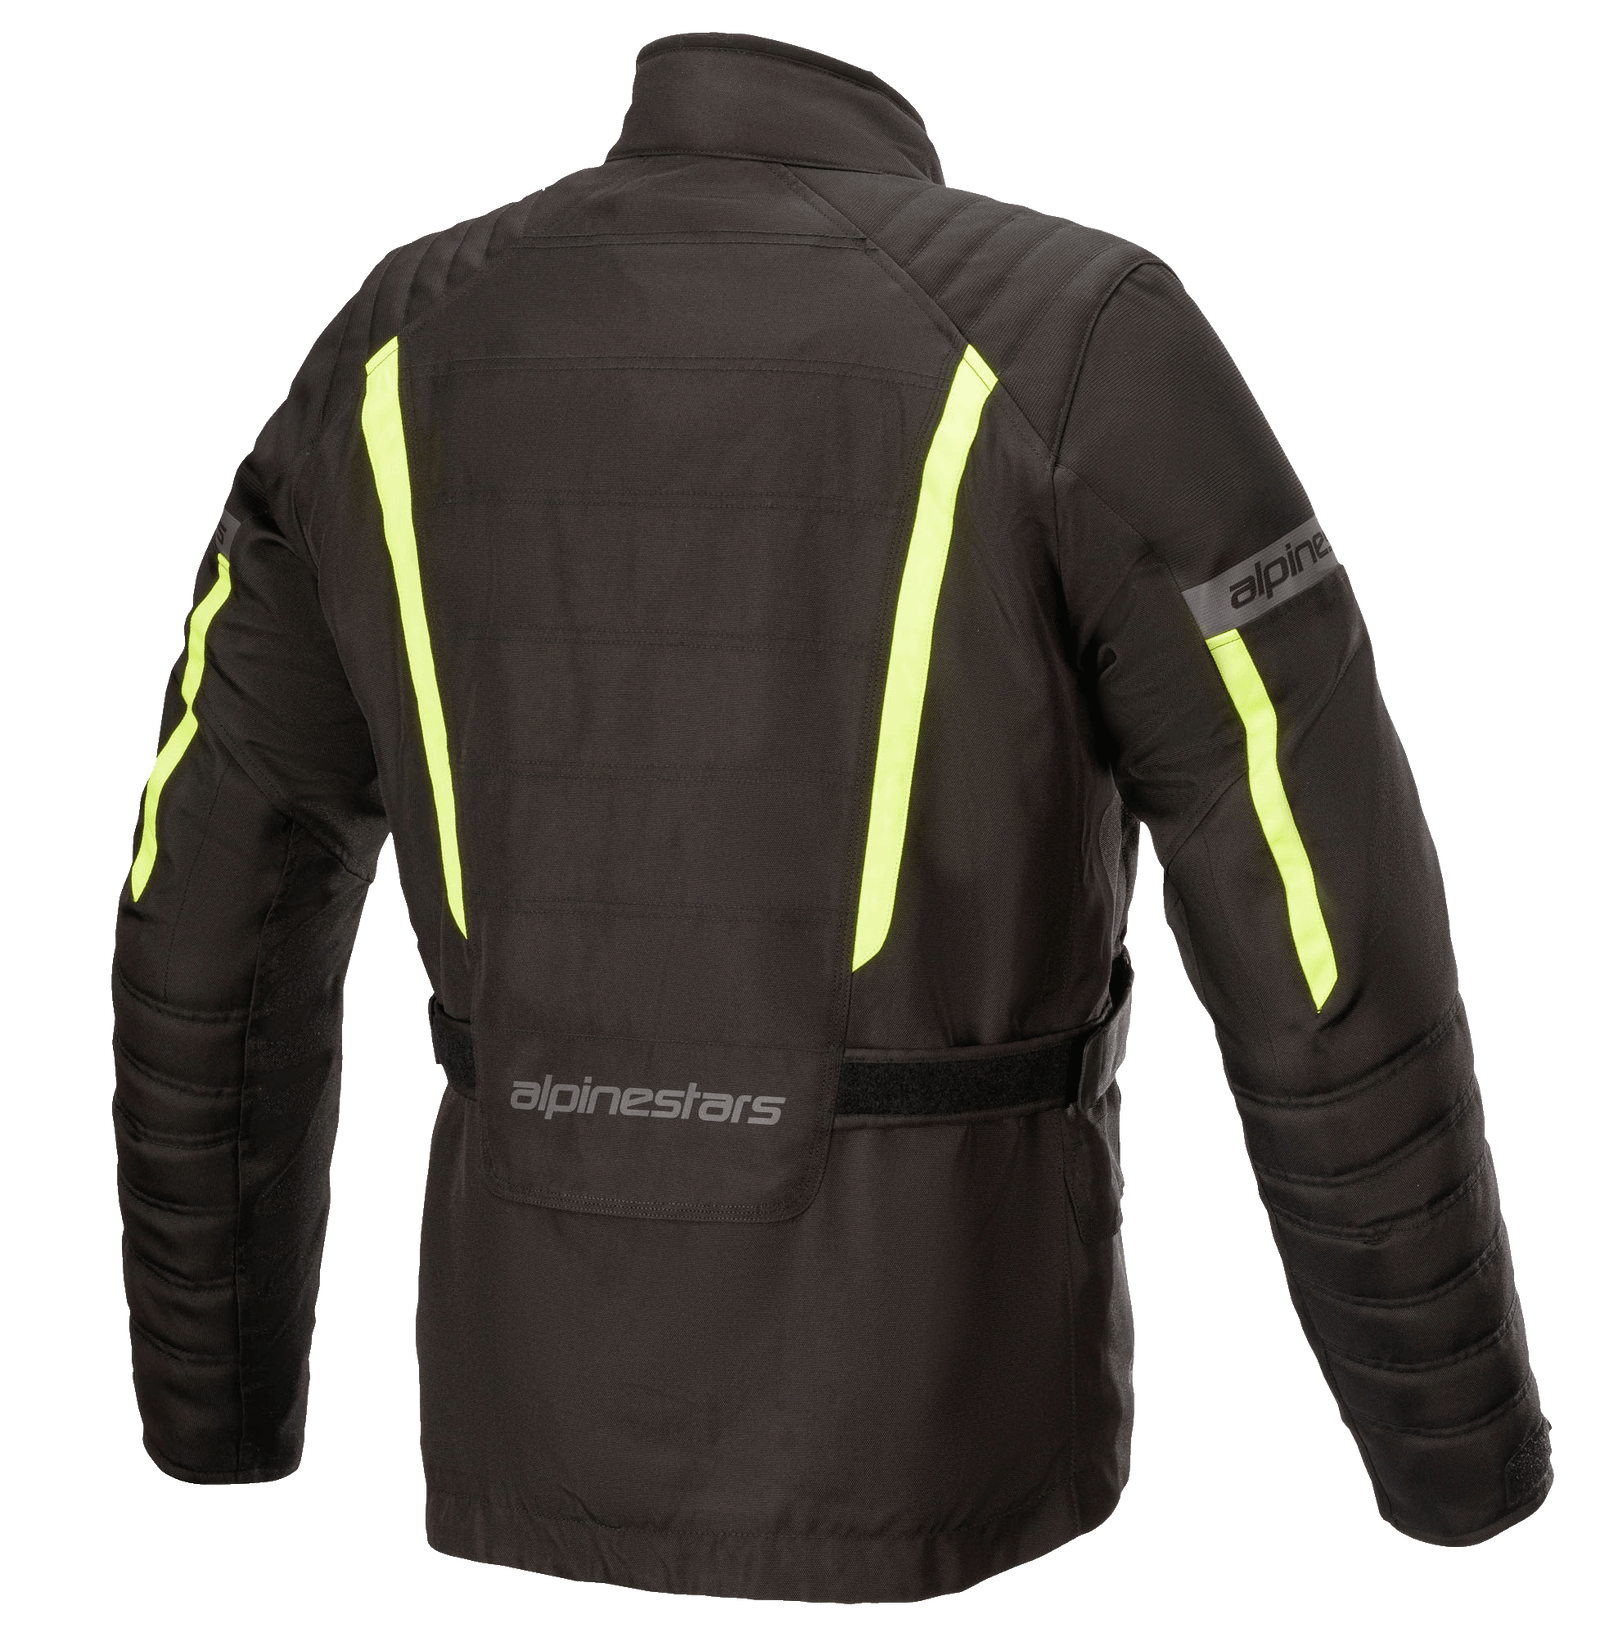 Adventure Touring Jackets | Page 2 | Alpinestars® Official Site